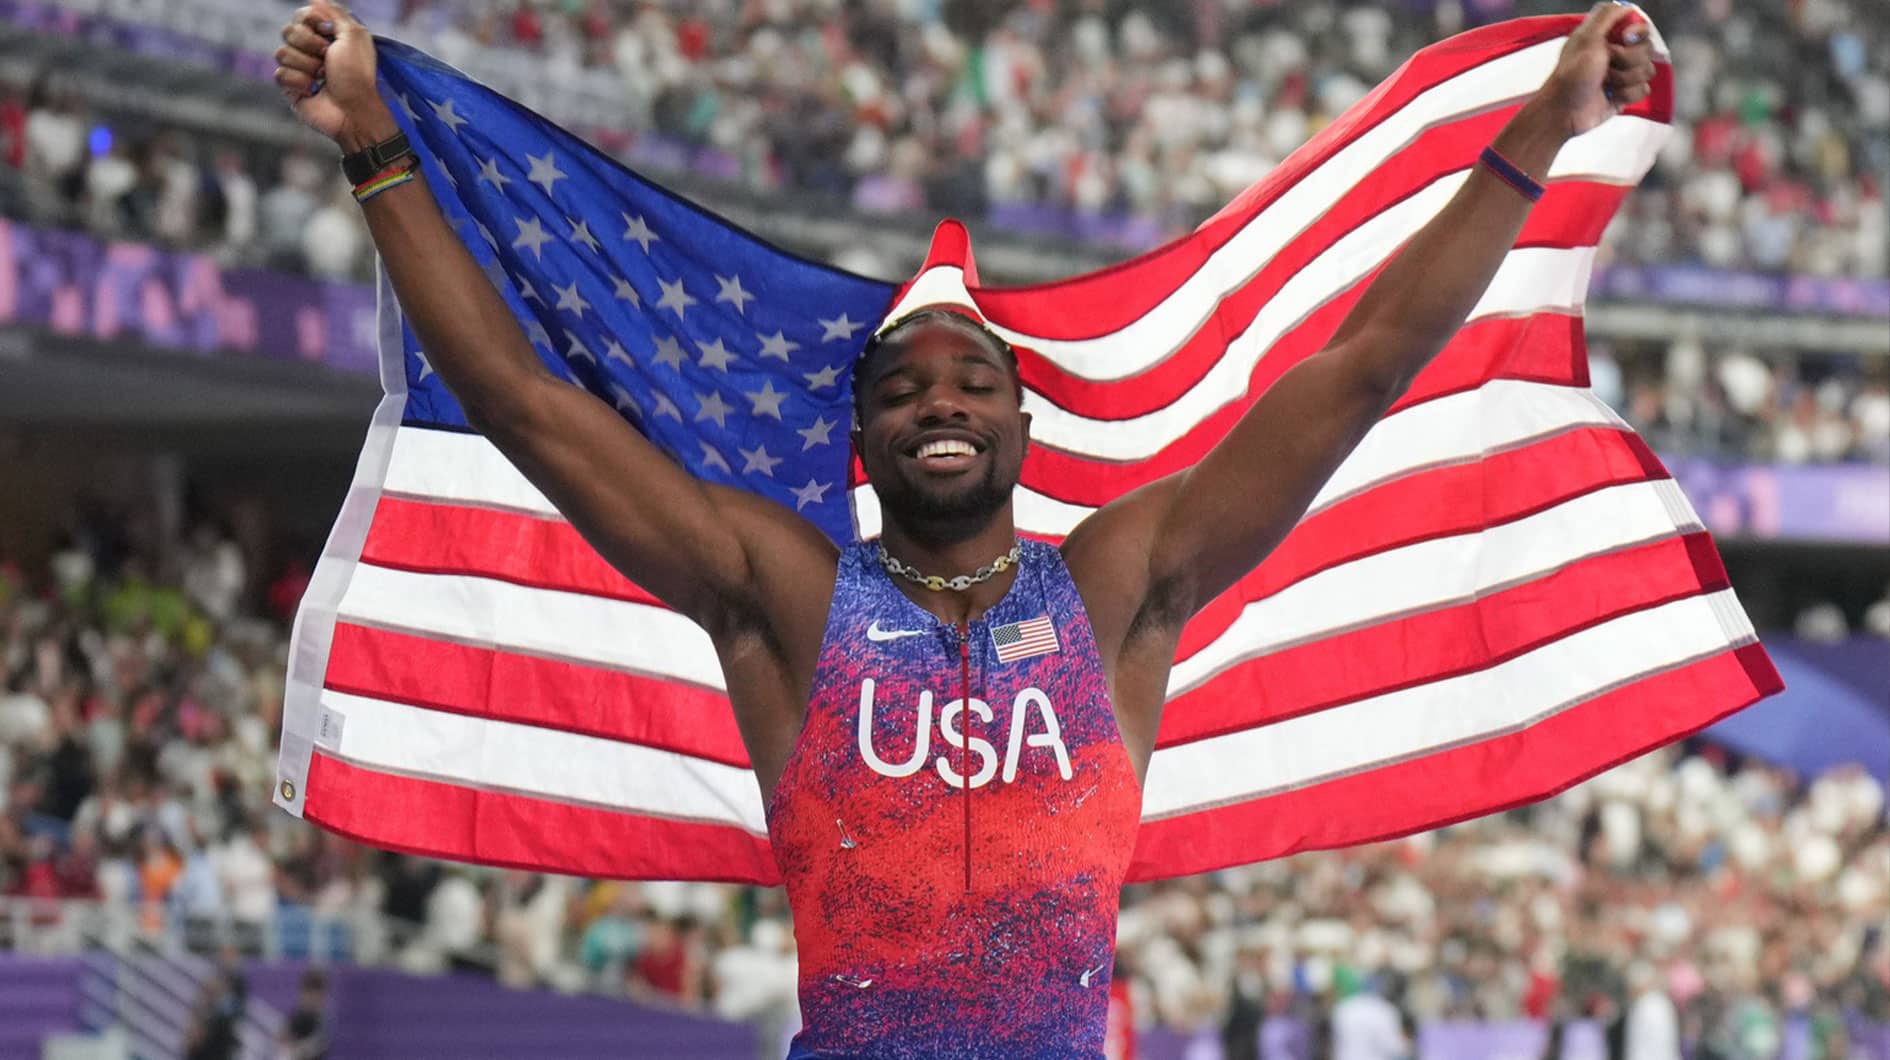 Noah Lyles (USA) celebrates after winning the men's 100m final during the Paris 2024 Olympic Summer Games at Stade de France. 